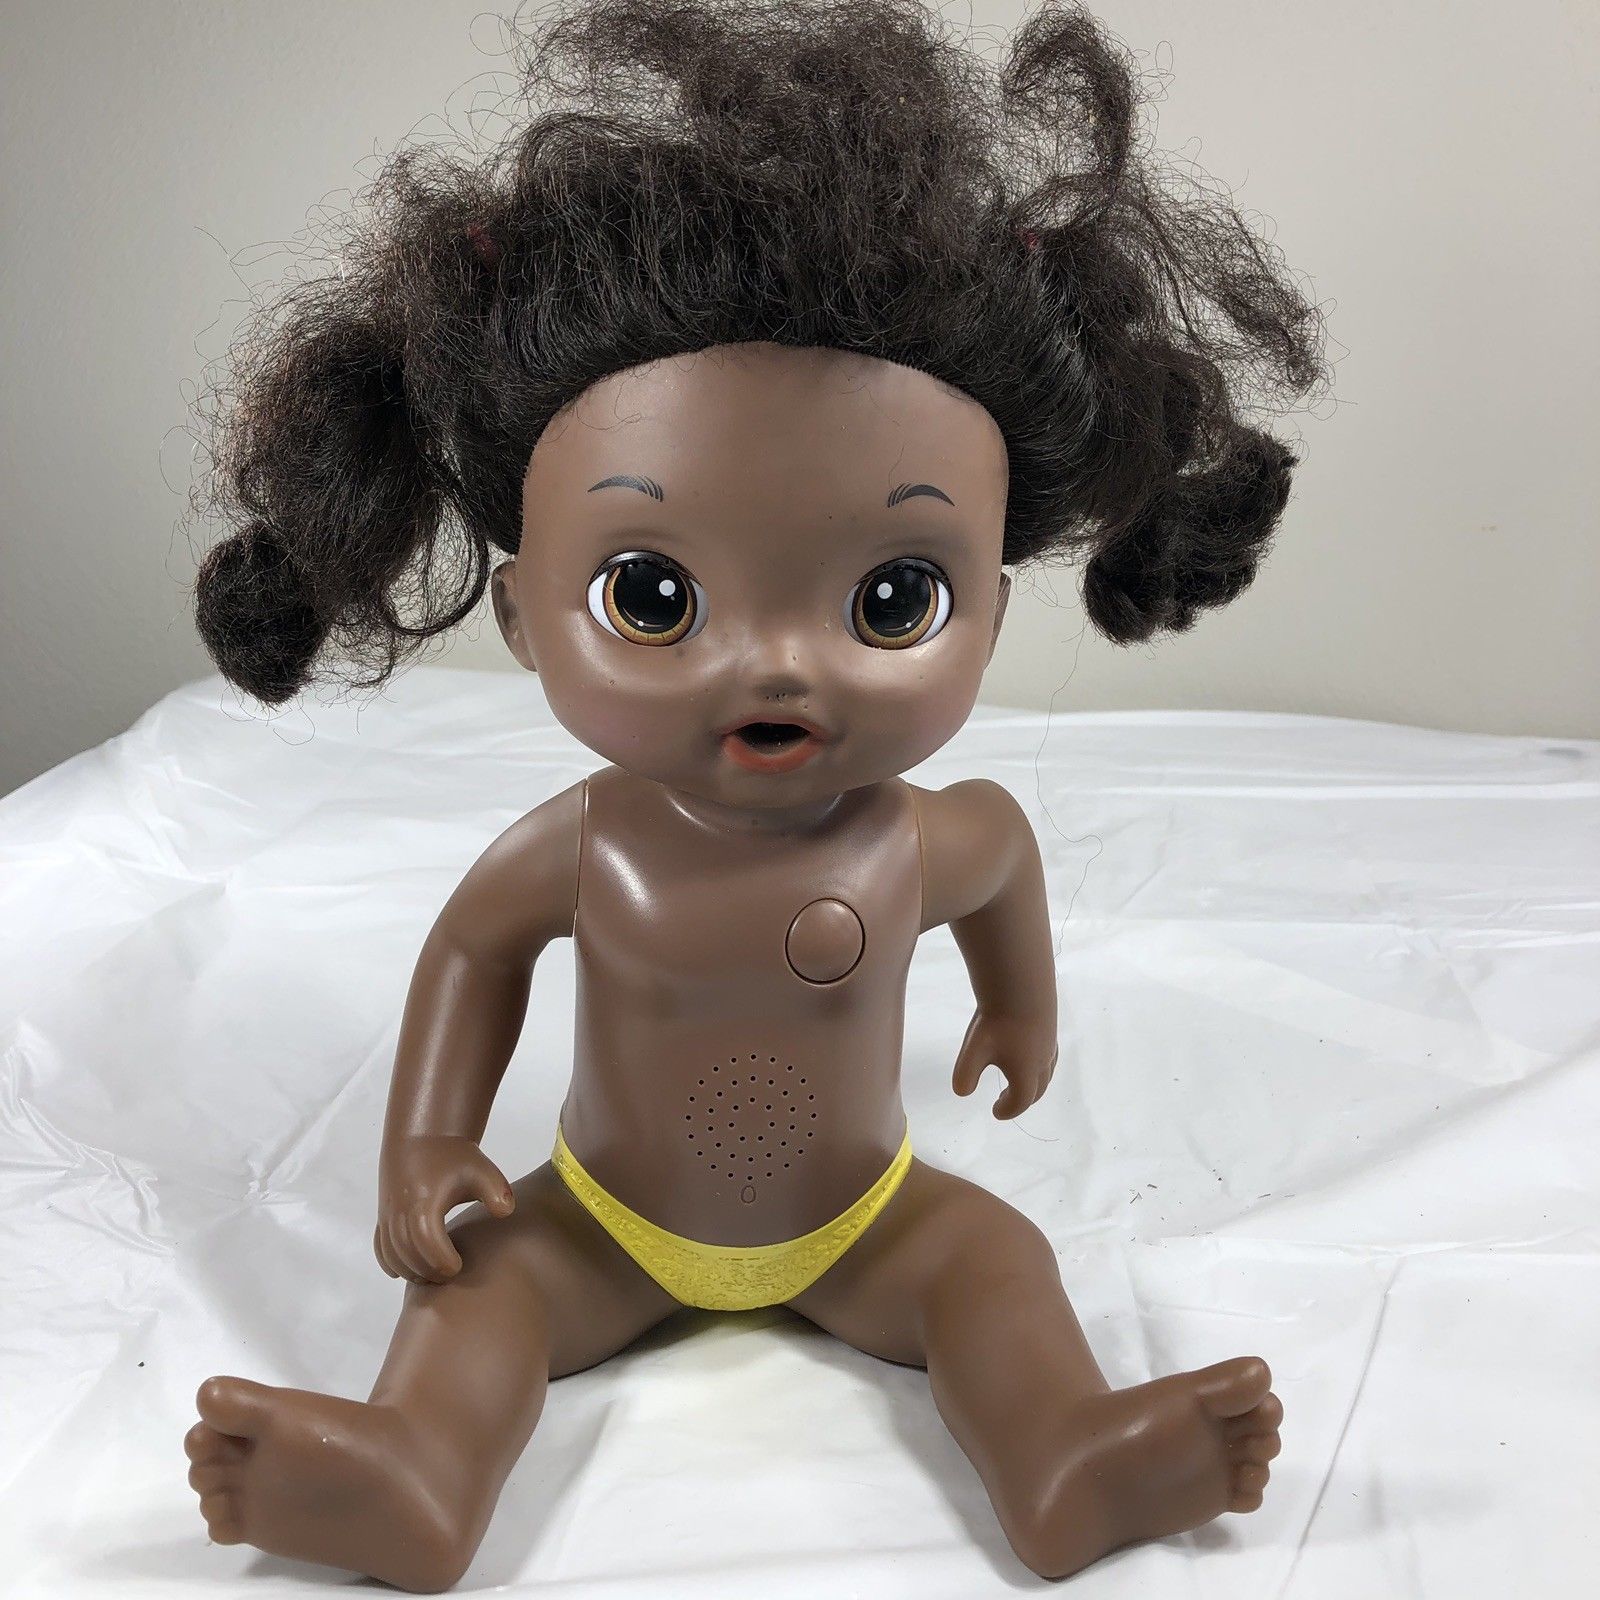 Baby Alive Hasbro My Baby Alive 10 Interactive Talking African American Doll Black Hair Dolls Bears